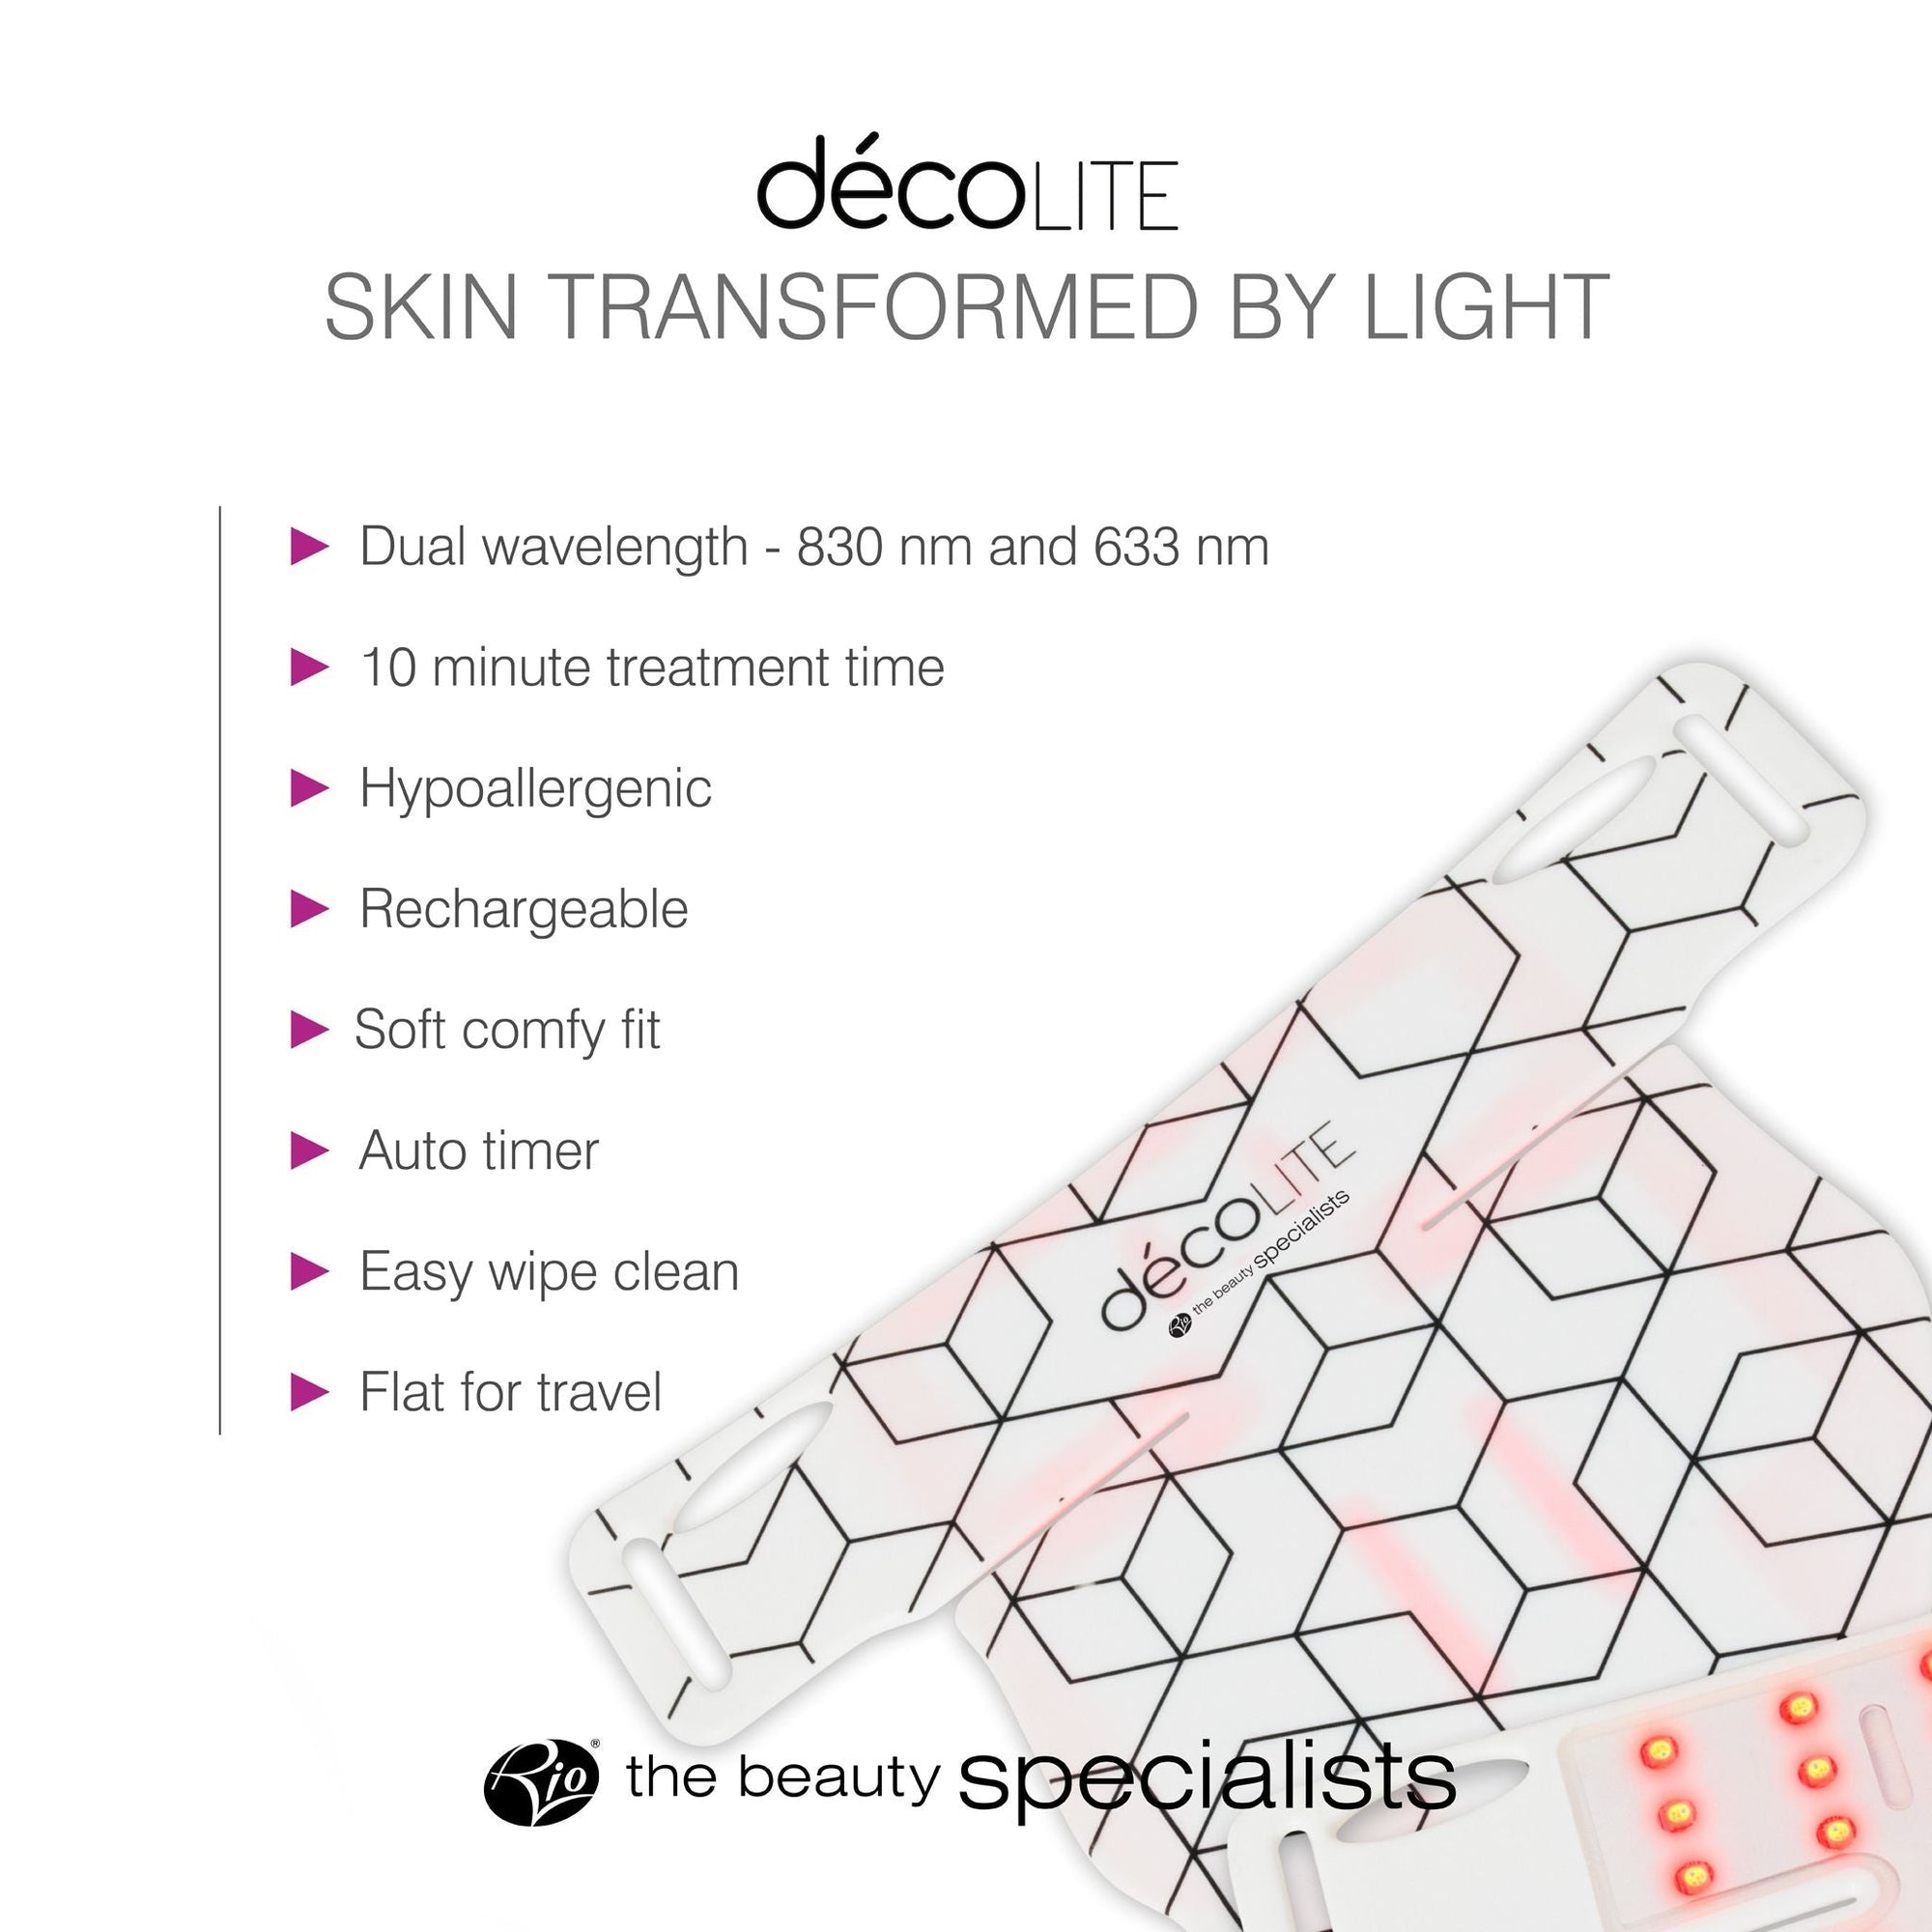 Bullet point list of features for the decoLITE LED light soft-fit mask.